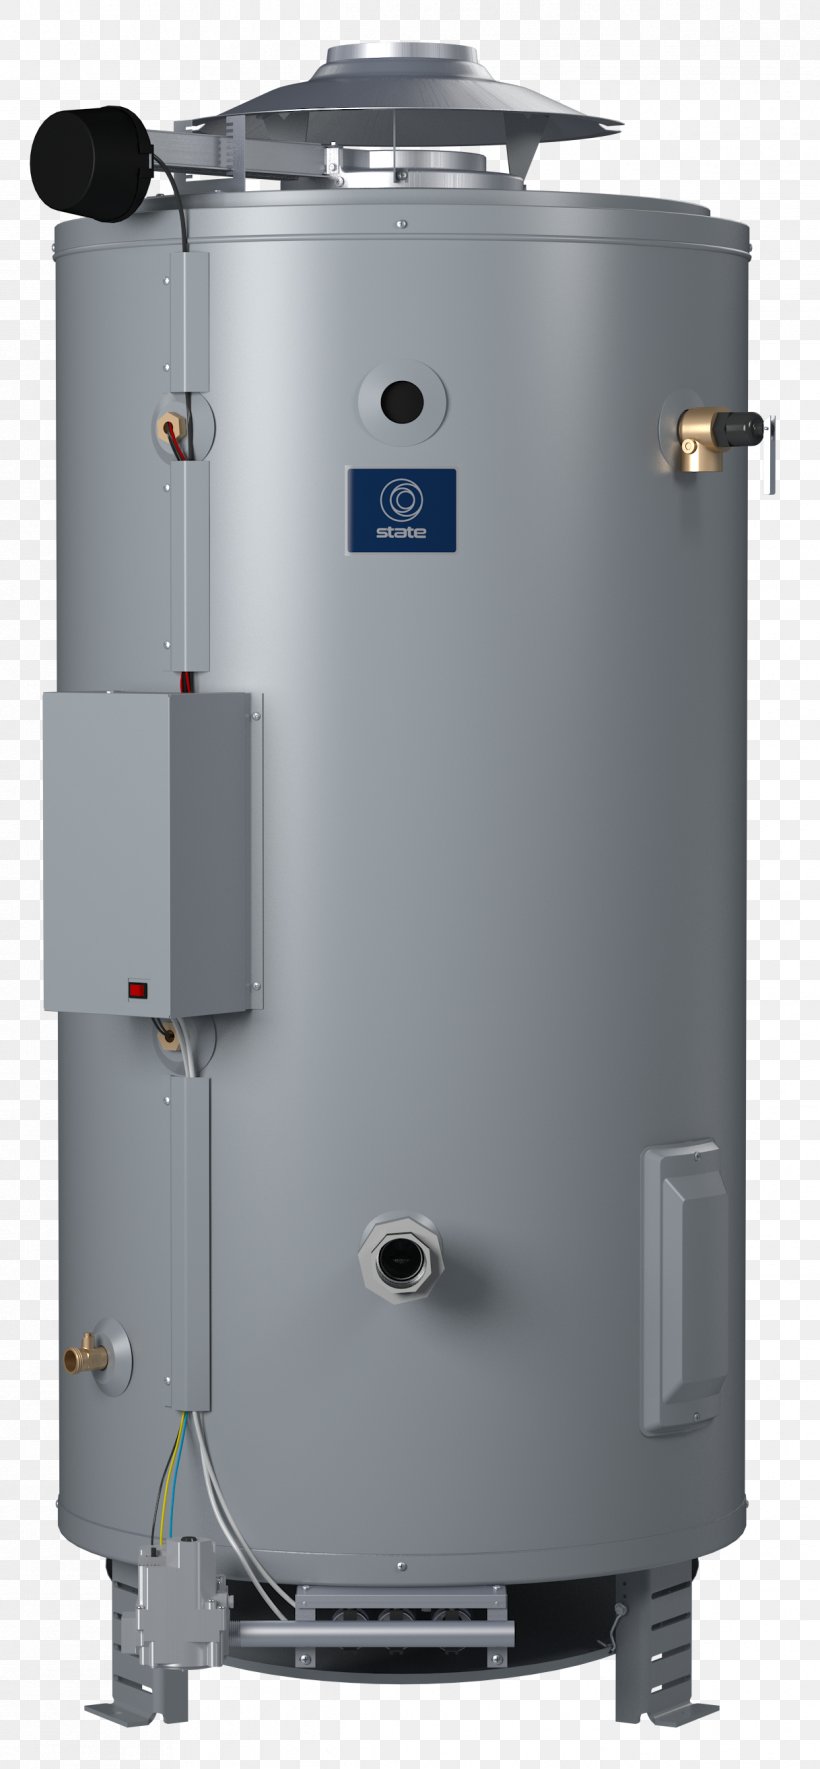 Water Heating A. O. Smith Water Products Company Natural Gas Heater Bradford White, PNG, 1218x2628px, Water Heating, Boiler, Bradford White, Cylinder, Electric Heating Download Free